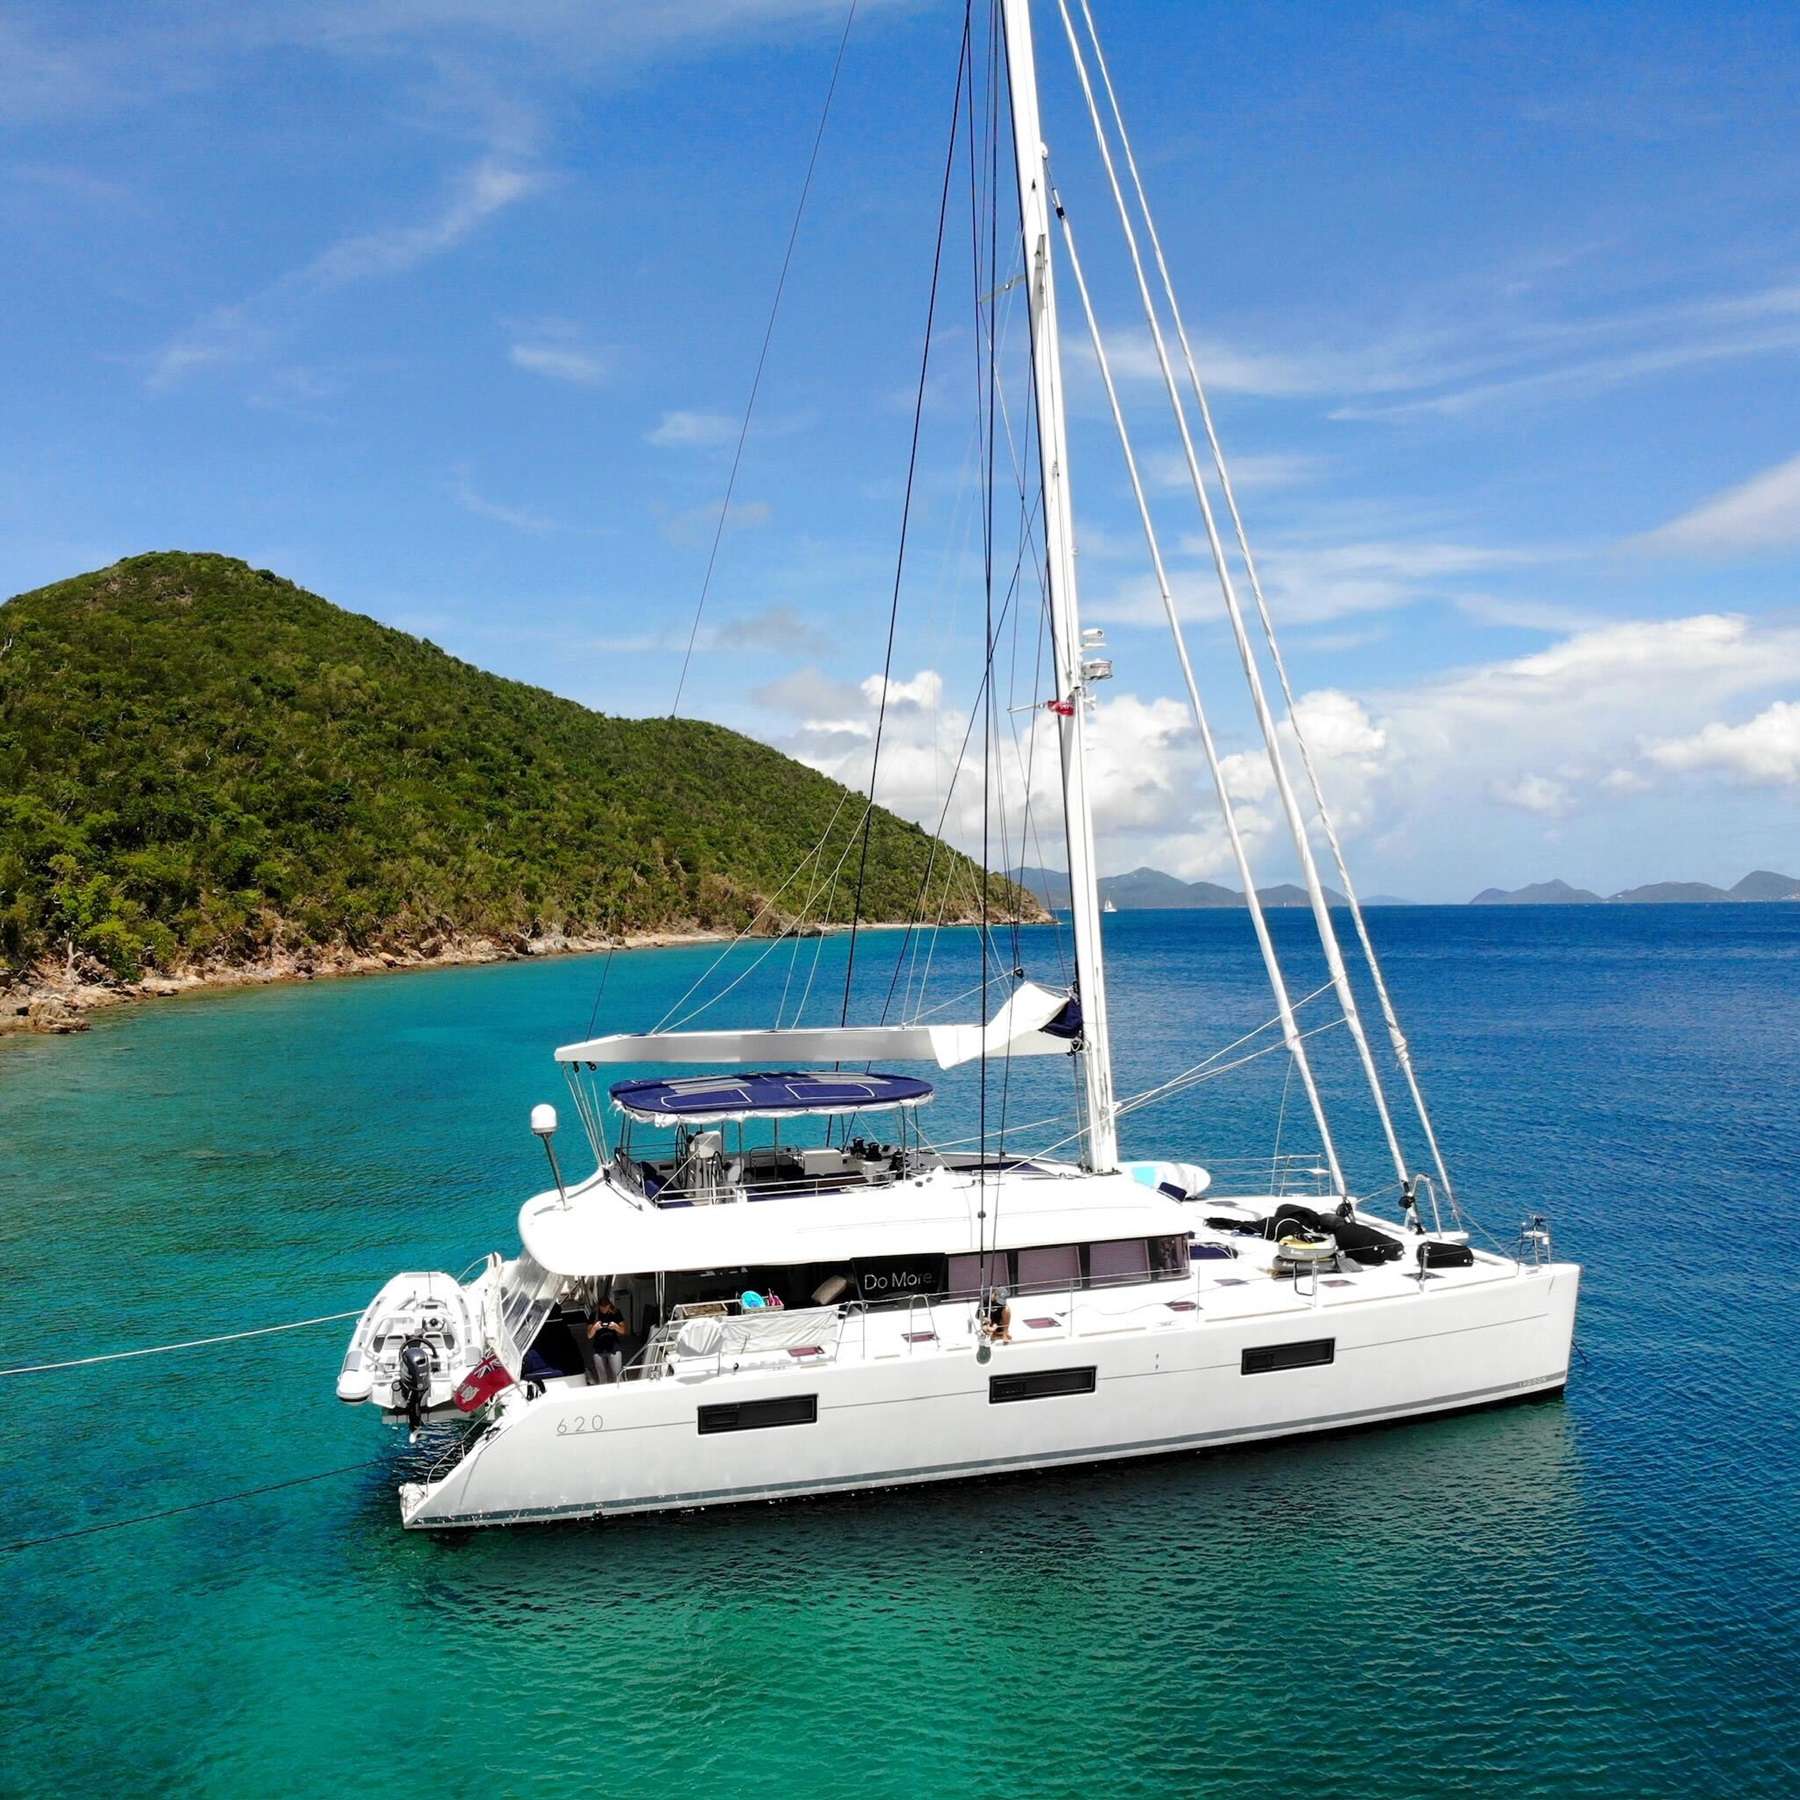 Do More Crewed Lagoon 620 Catamaran Charters Sailing the BVI for up to 10 guests.